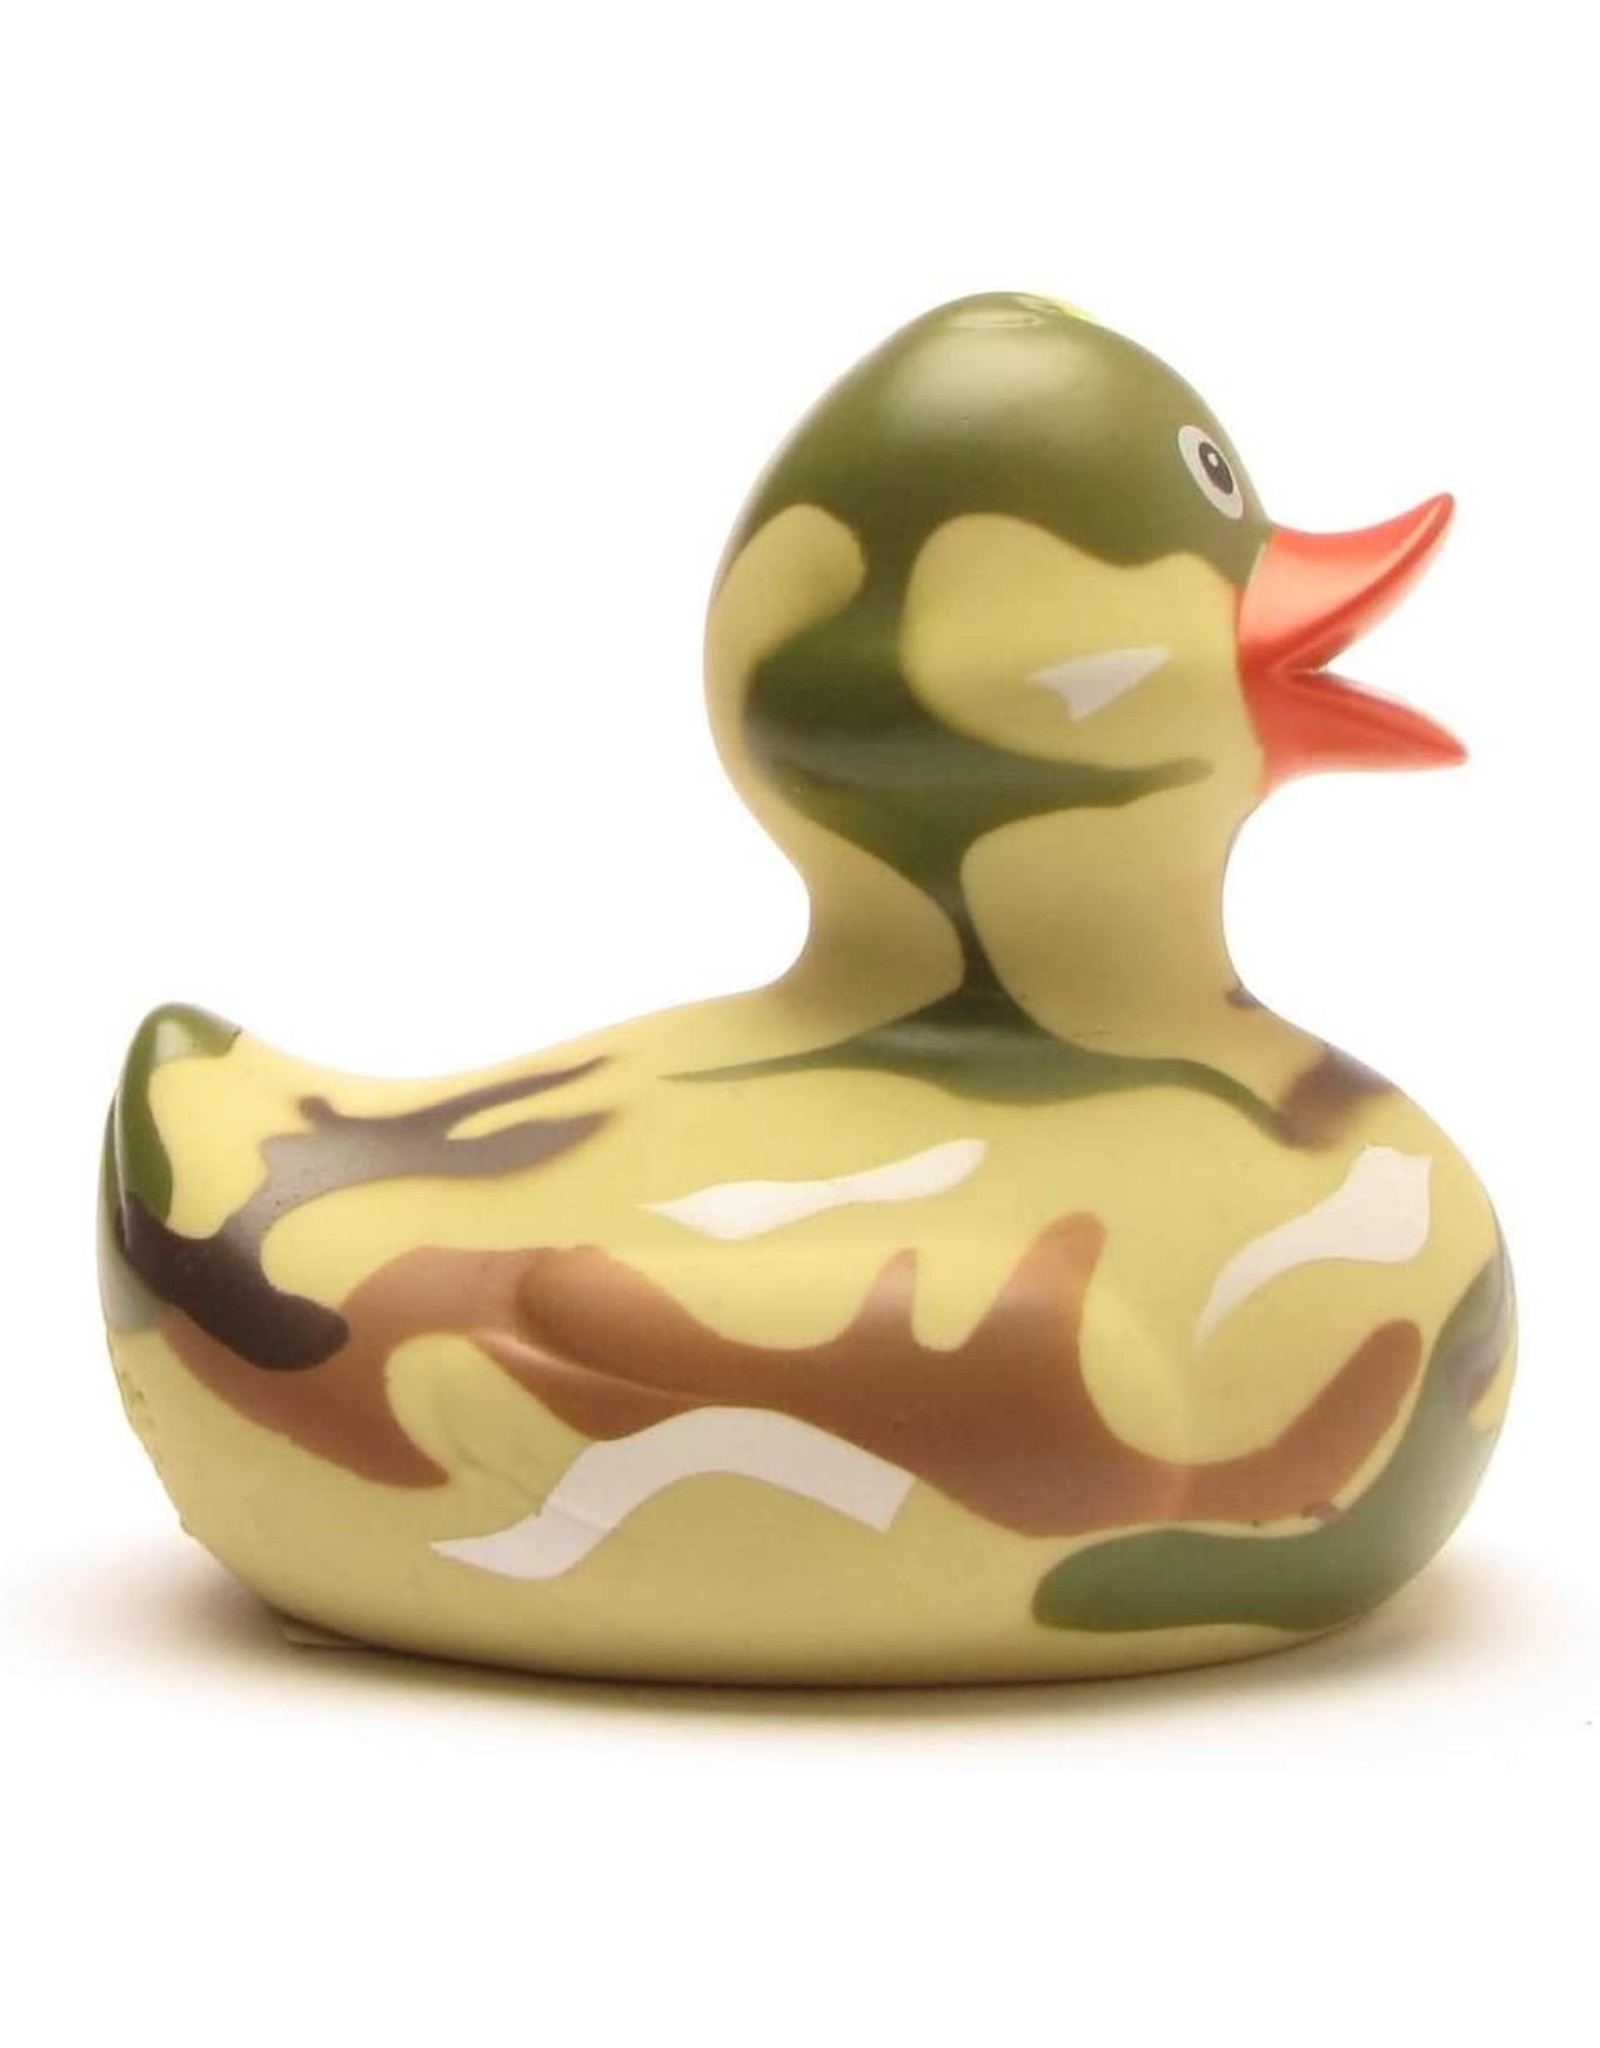 Camouflage/Army Rubber Duck